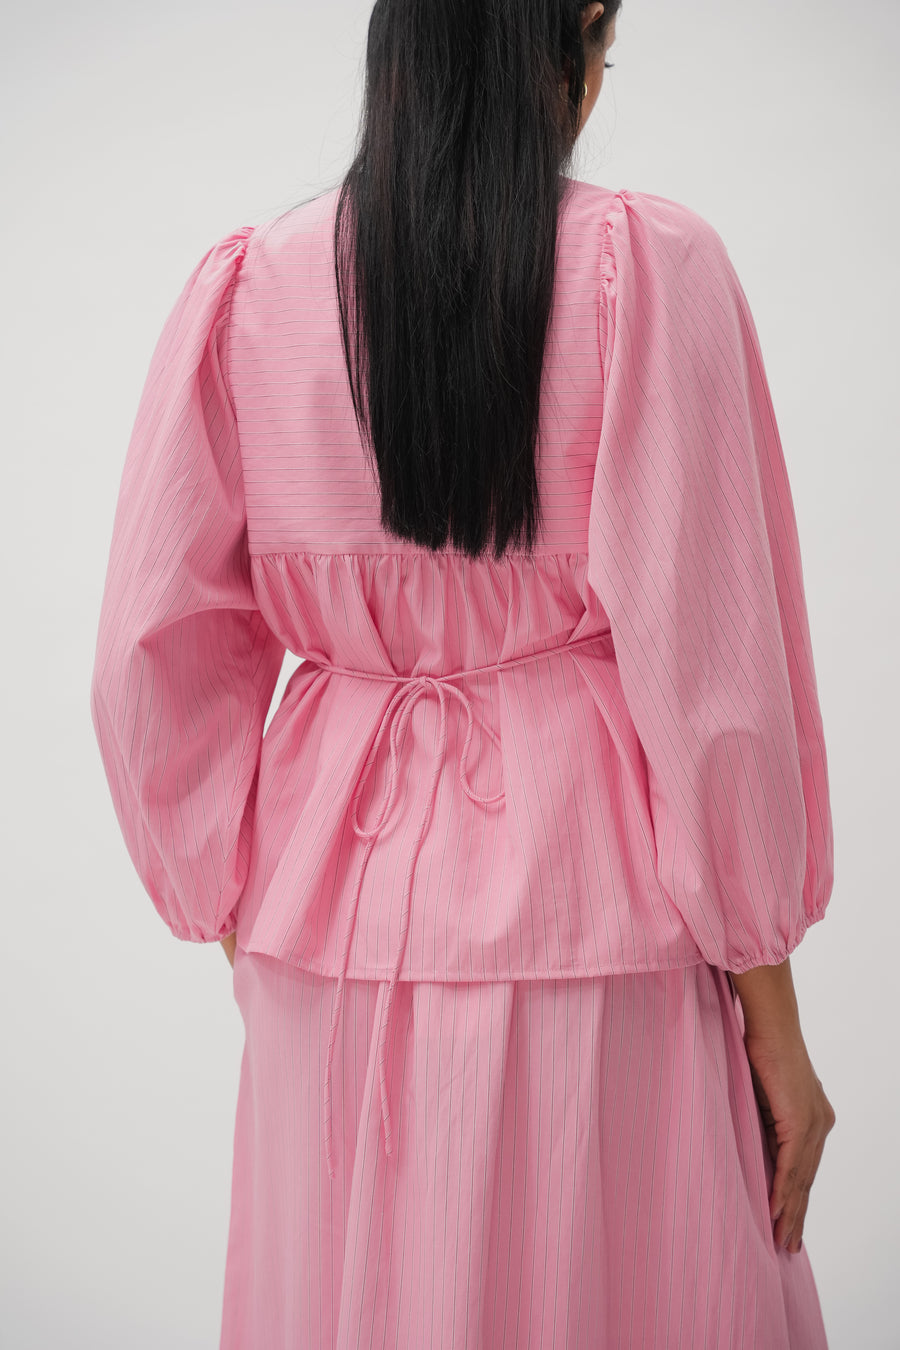 Big Day Blouse in Pink Stripe